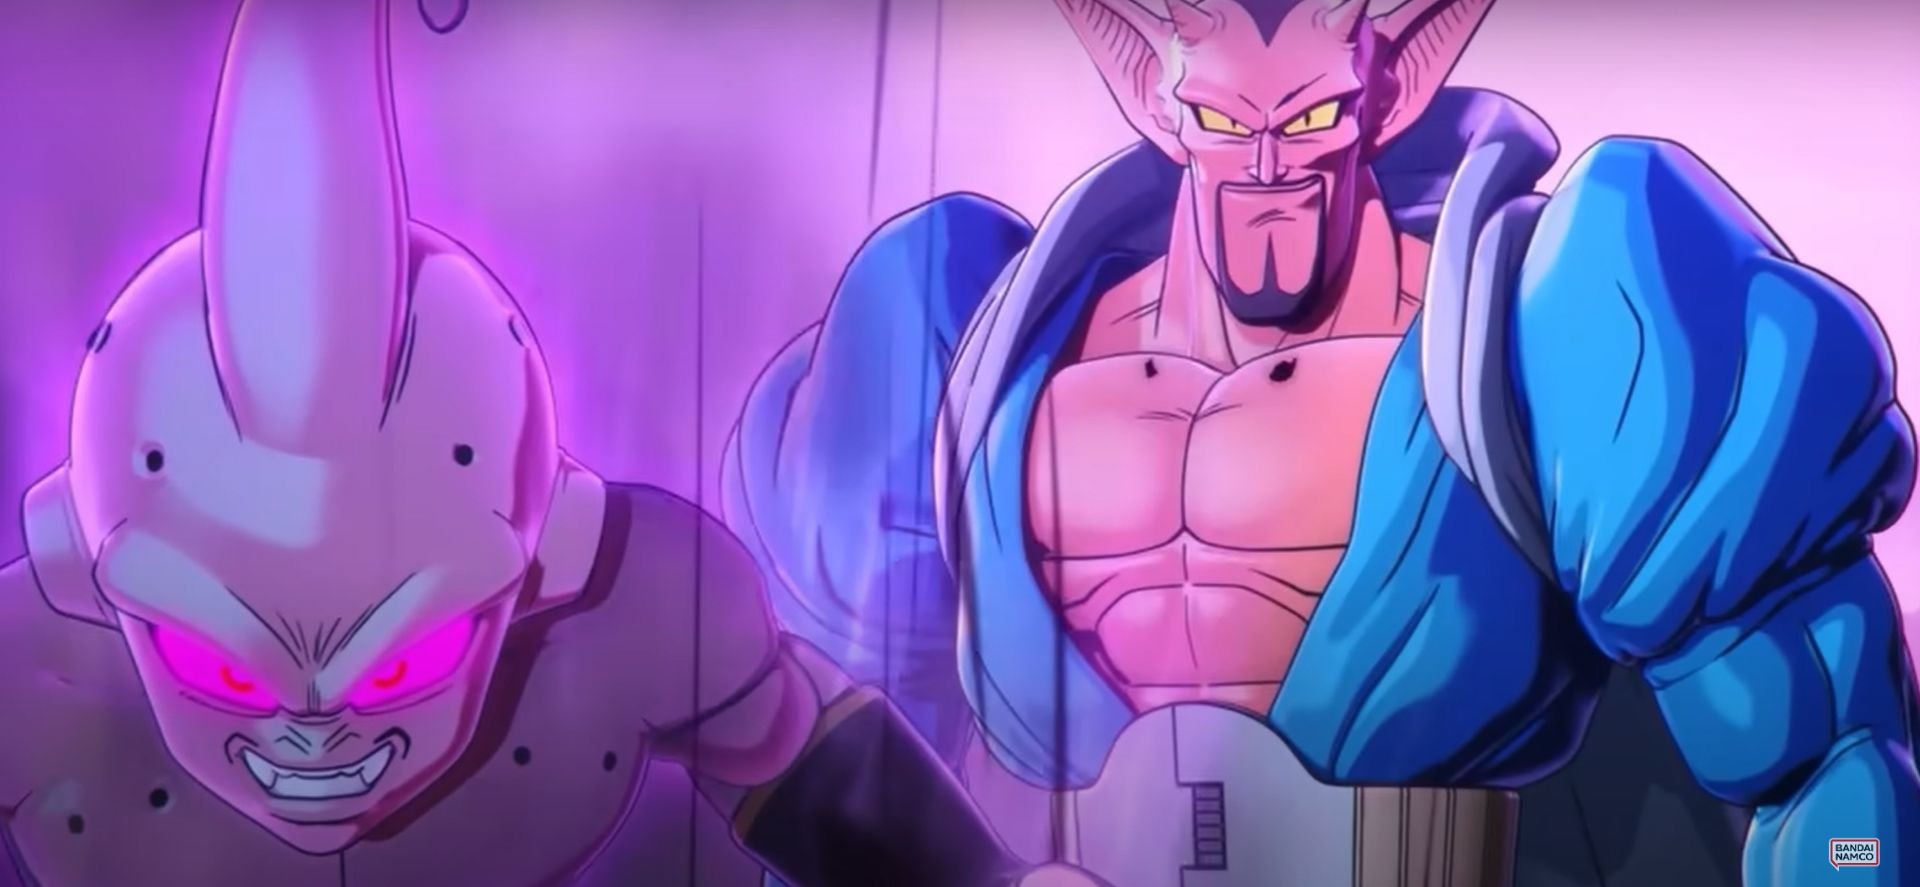 Dragon Ball Xenoverse 2 Gets New Missions and Free Update